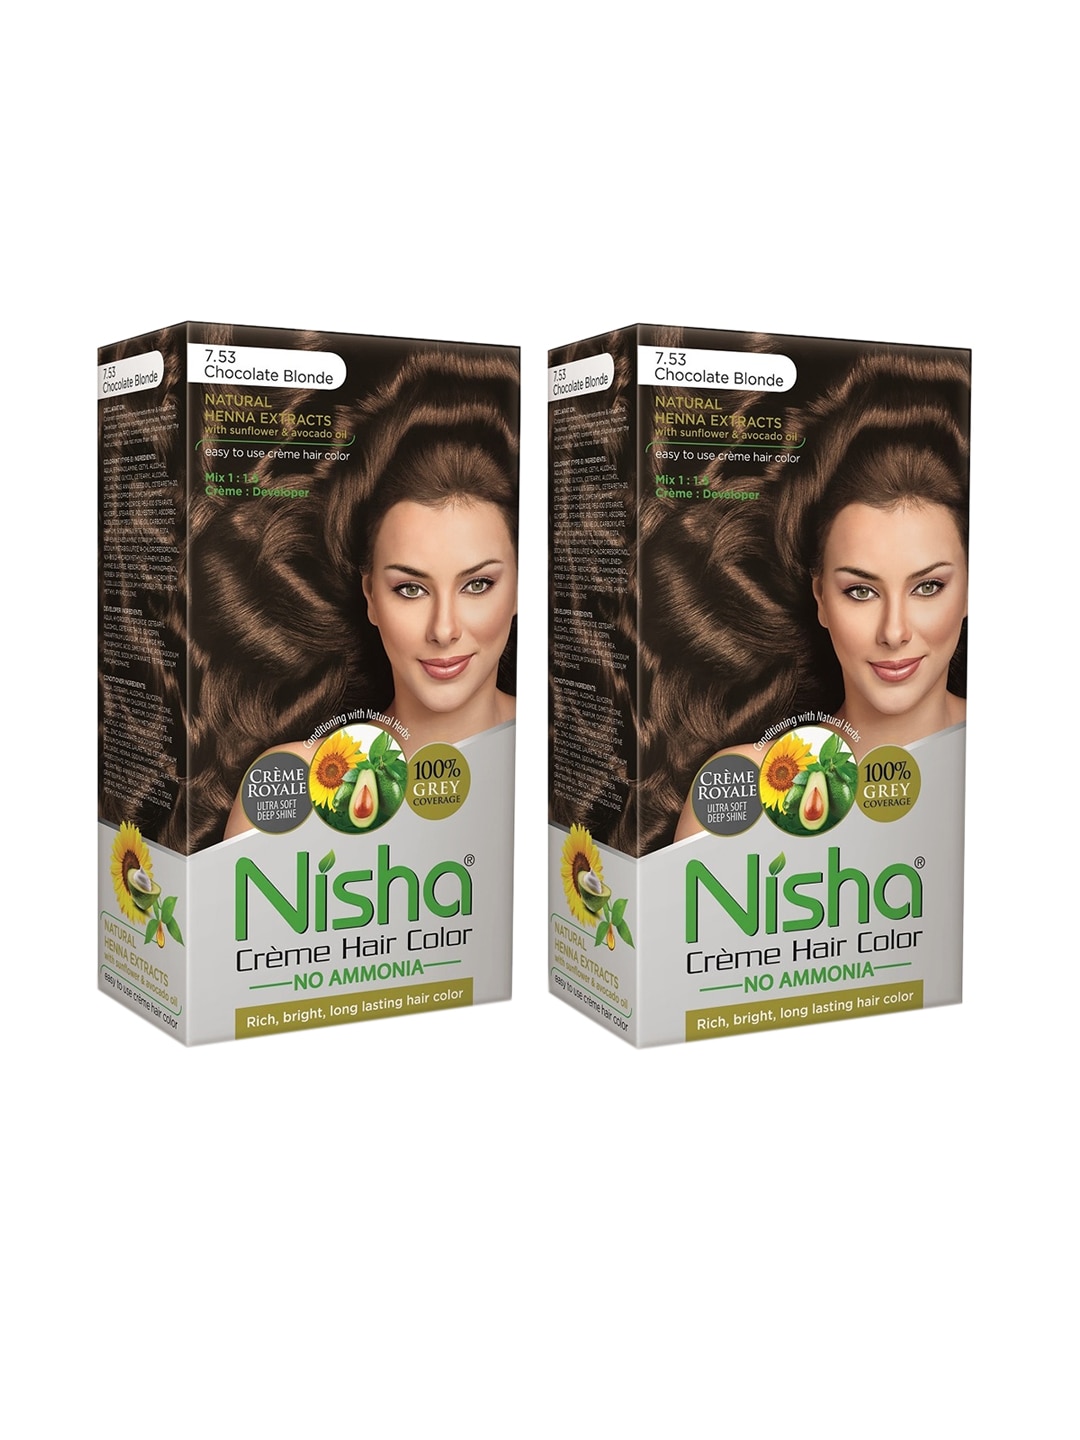 Nisha Unisex Pack of 2 Creme Hair Color 150gm each- Chocolate Blonde Price in India